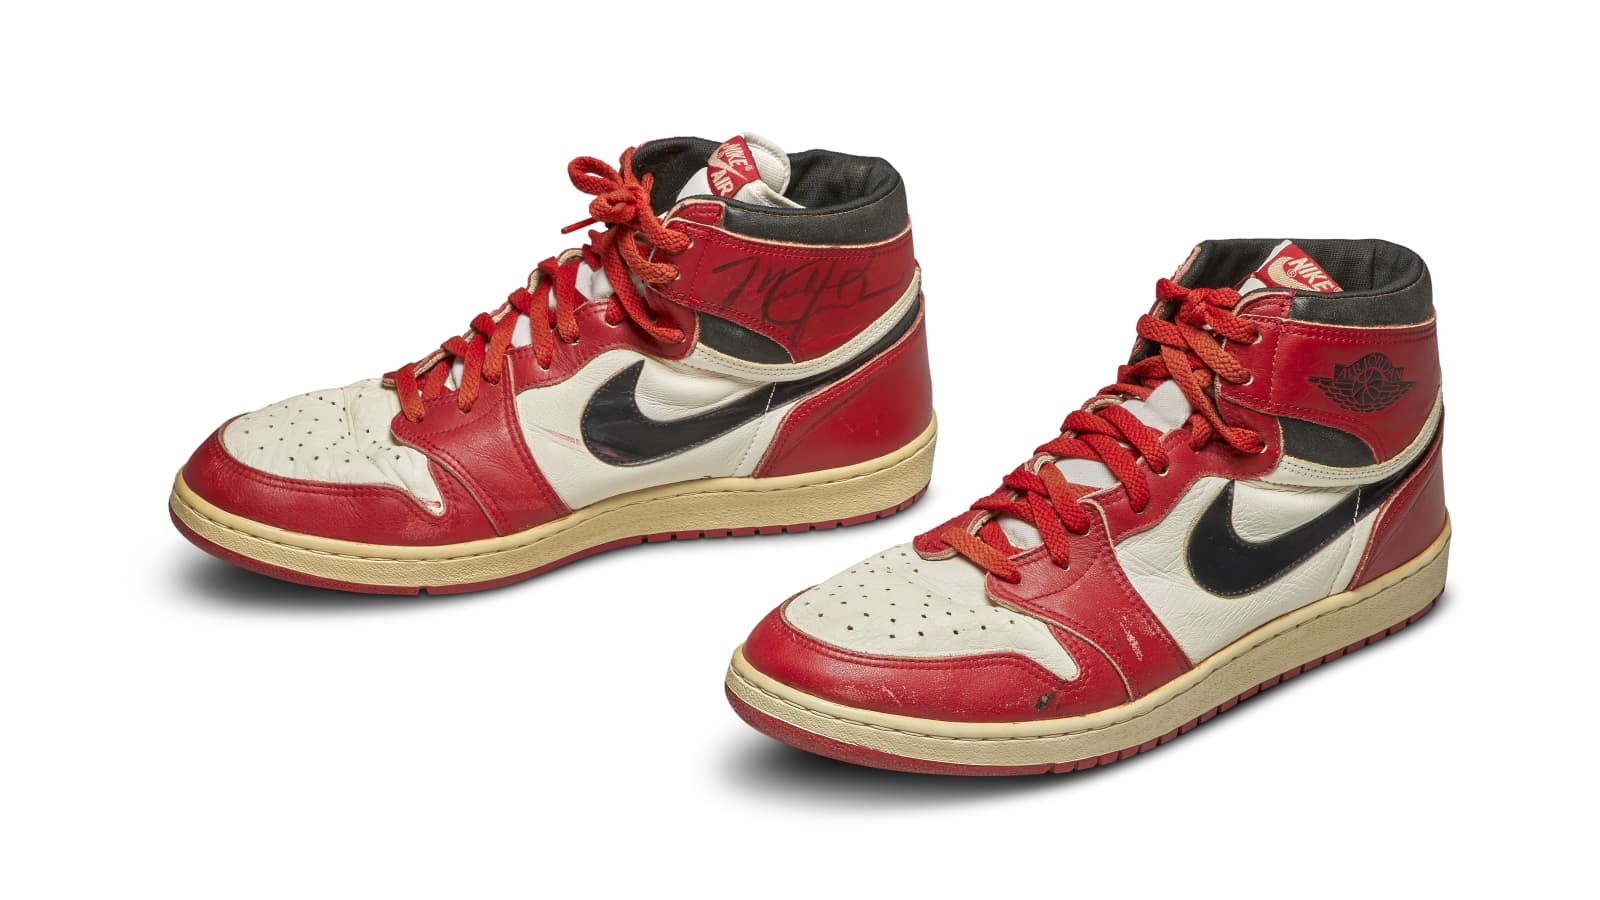 5 of the Most Expensive Sneakers Ever Made